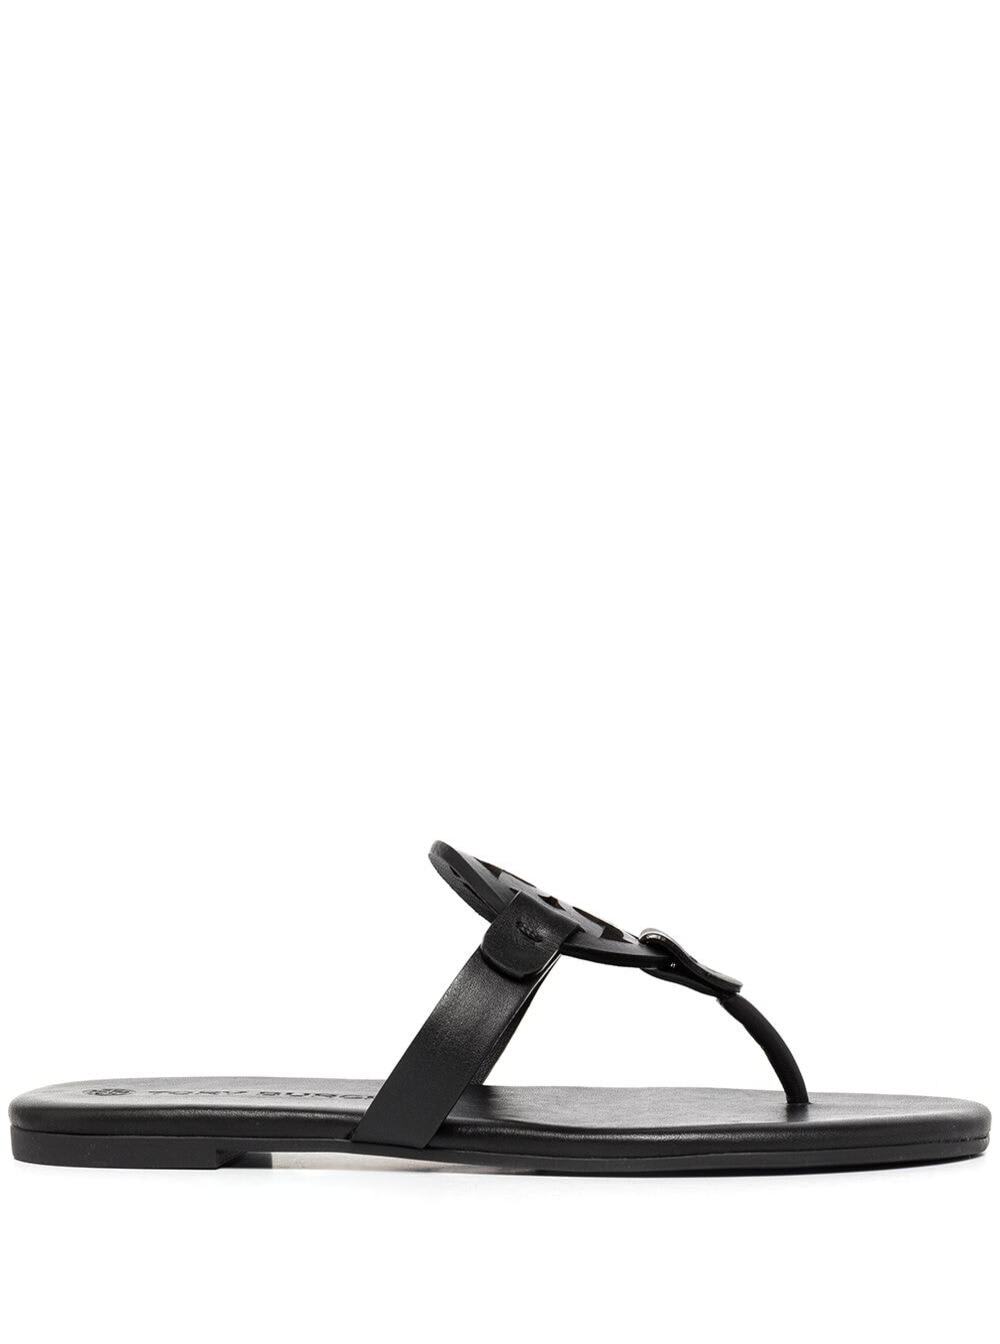 Tory Burch Womans Black Leather Sandals With Logo